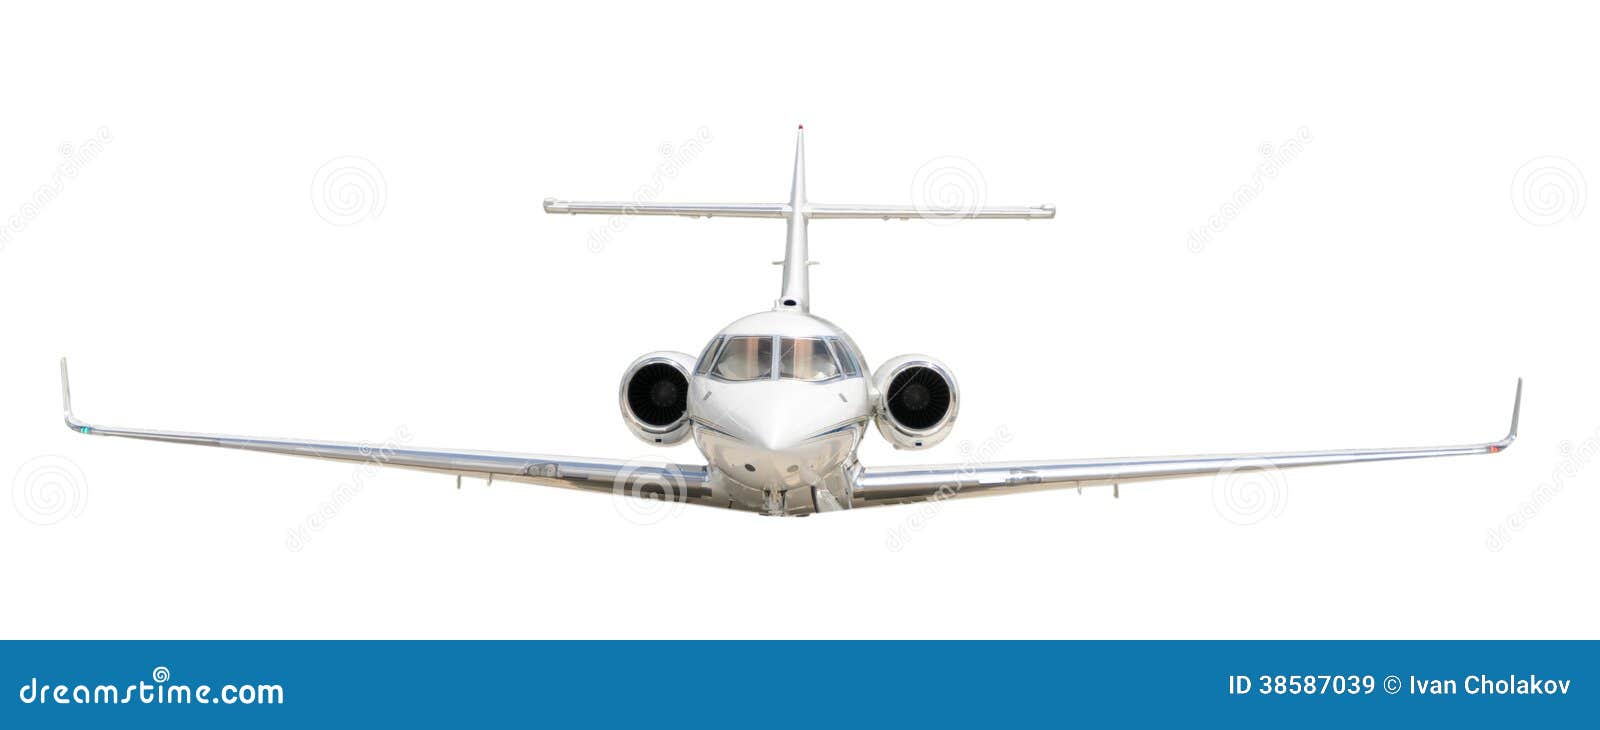 airplane clipart front view - photo #33